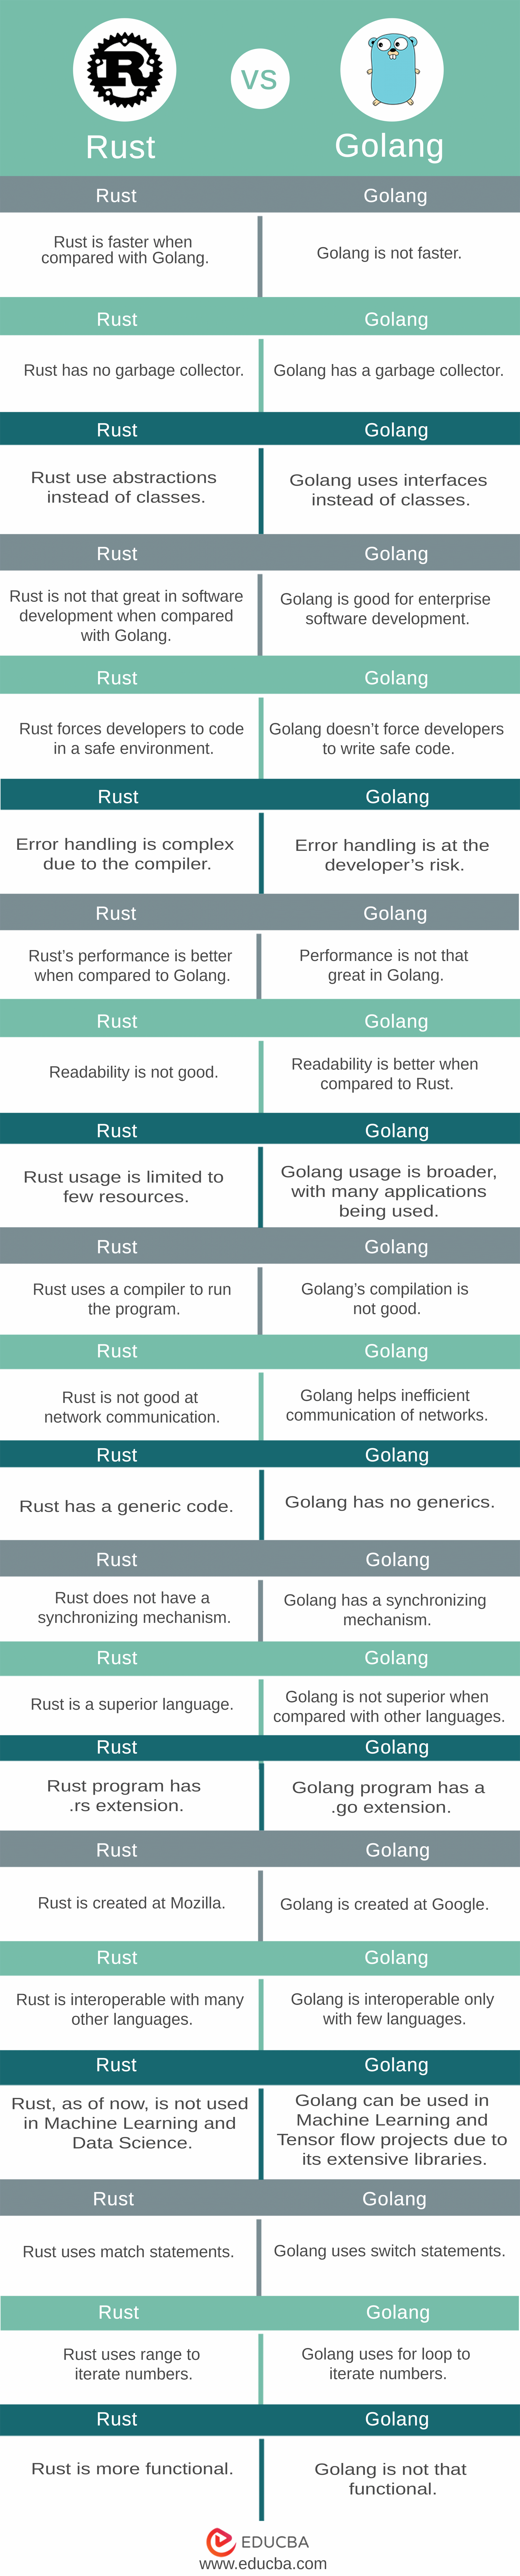 Rust vs Golang infographic